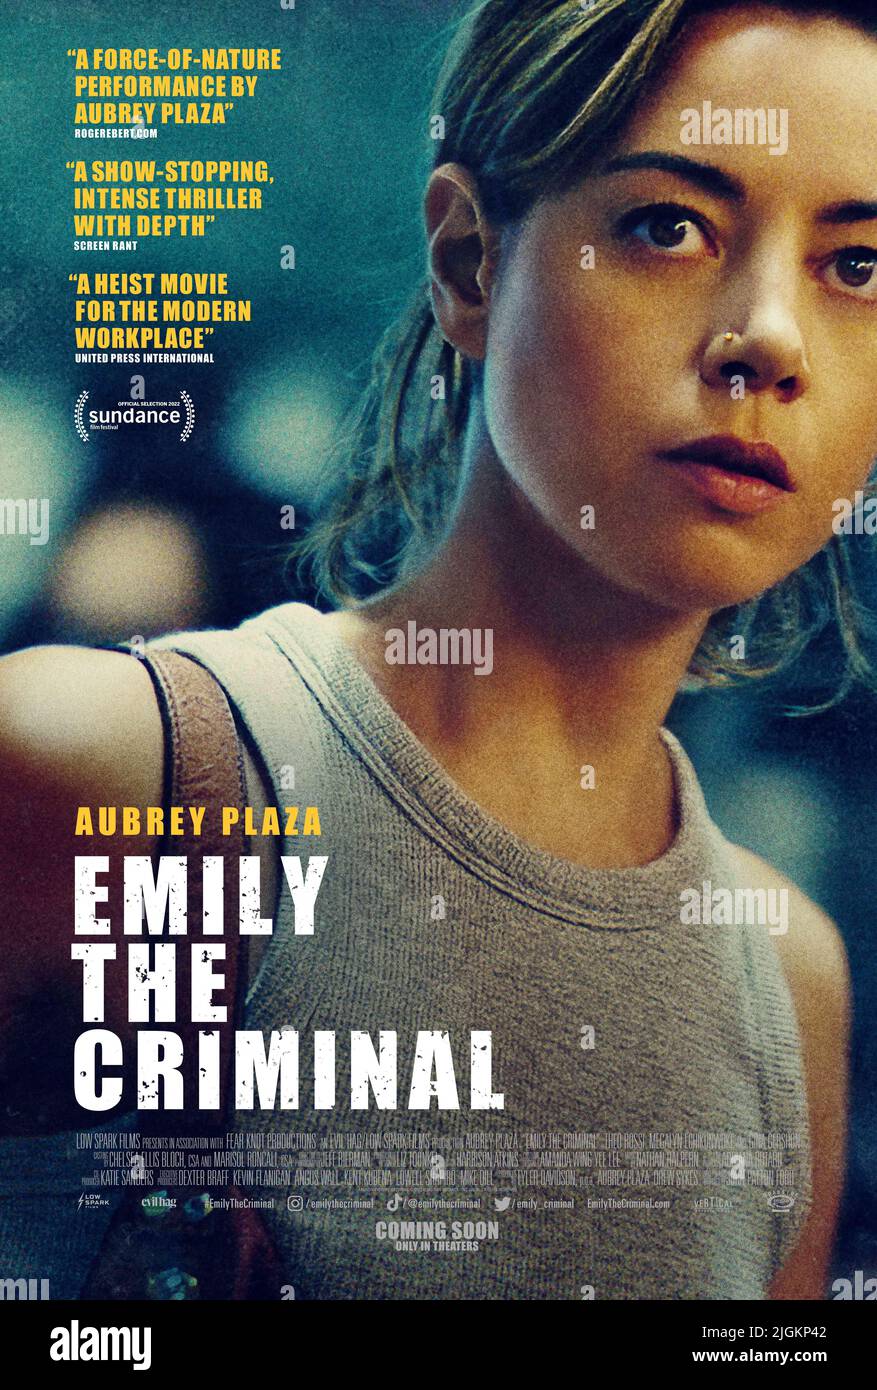 RELEASE DATE: August 12, 2022. TITLE: Emily The Criminal. STUDIO: Roadside Attractions. DIRECTOR: John Patton Ford. PLOT: Down on her luck and saddled with debt, Emily gets involved in a credit card scam that pulls her into the criminal underworld of Los Angeles, ultimately leading to deadly consequences. STARRING: AUBREY PLAZA as Emily poster art. (Credit Image: © Roadside Attractions/Entertainment Pictures) Stock Photo